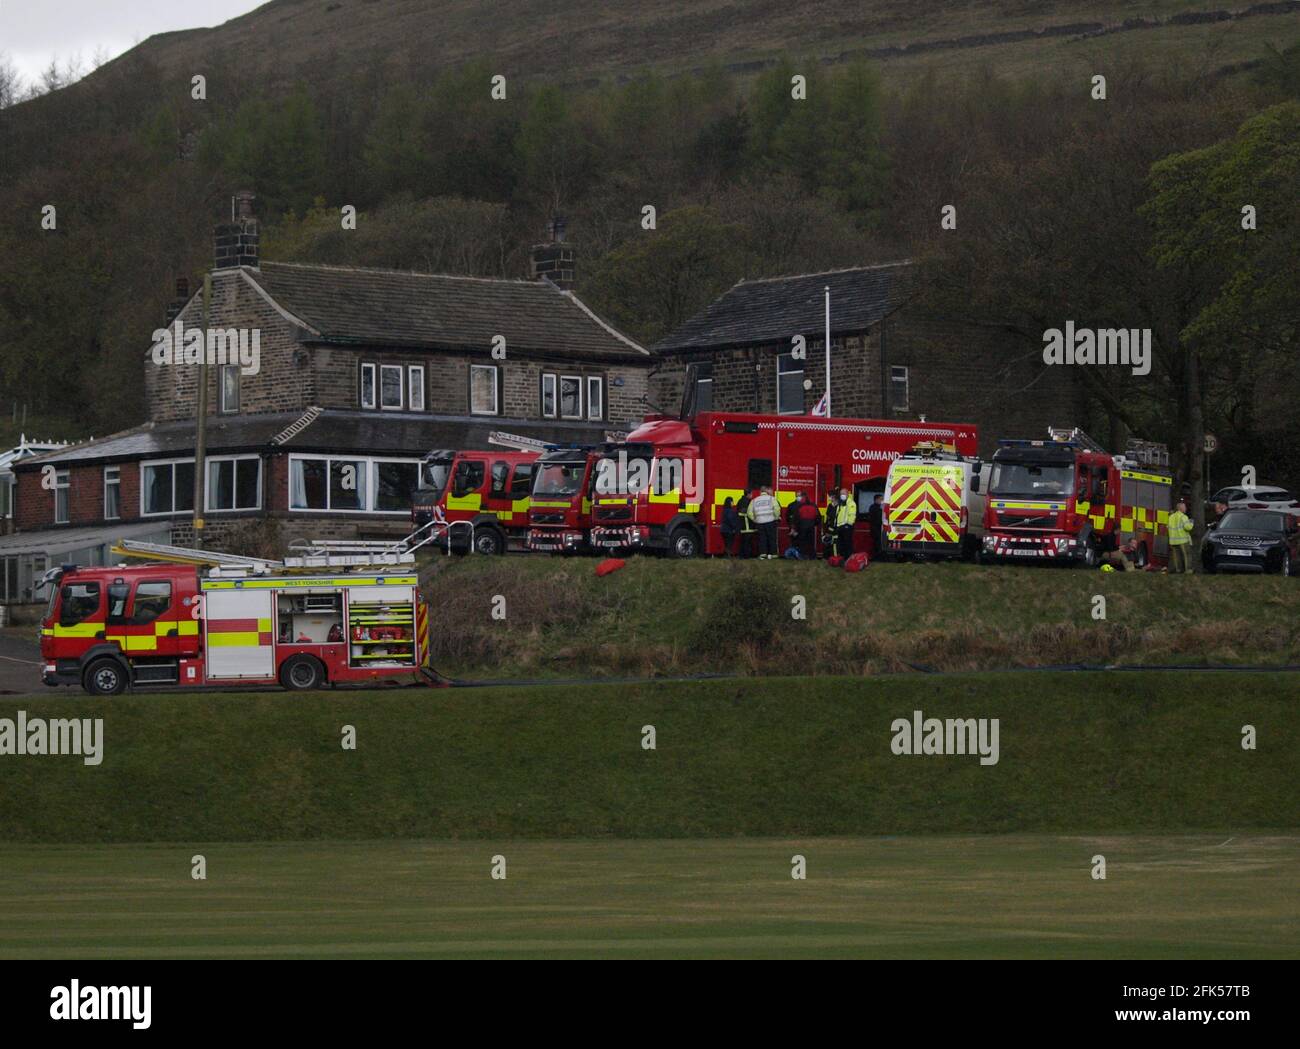 West Yorkshire Fire & Rescue Service tackle a moorland wildfire on the National Trust's Marsden Moor Estate between Redbrook and Butterley Reservoirs. Stock Photo